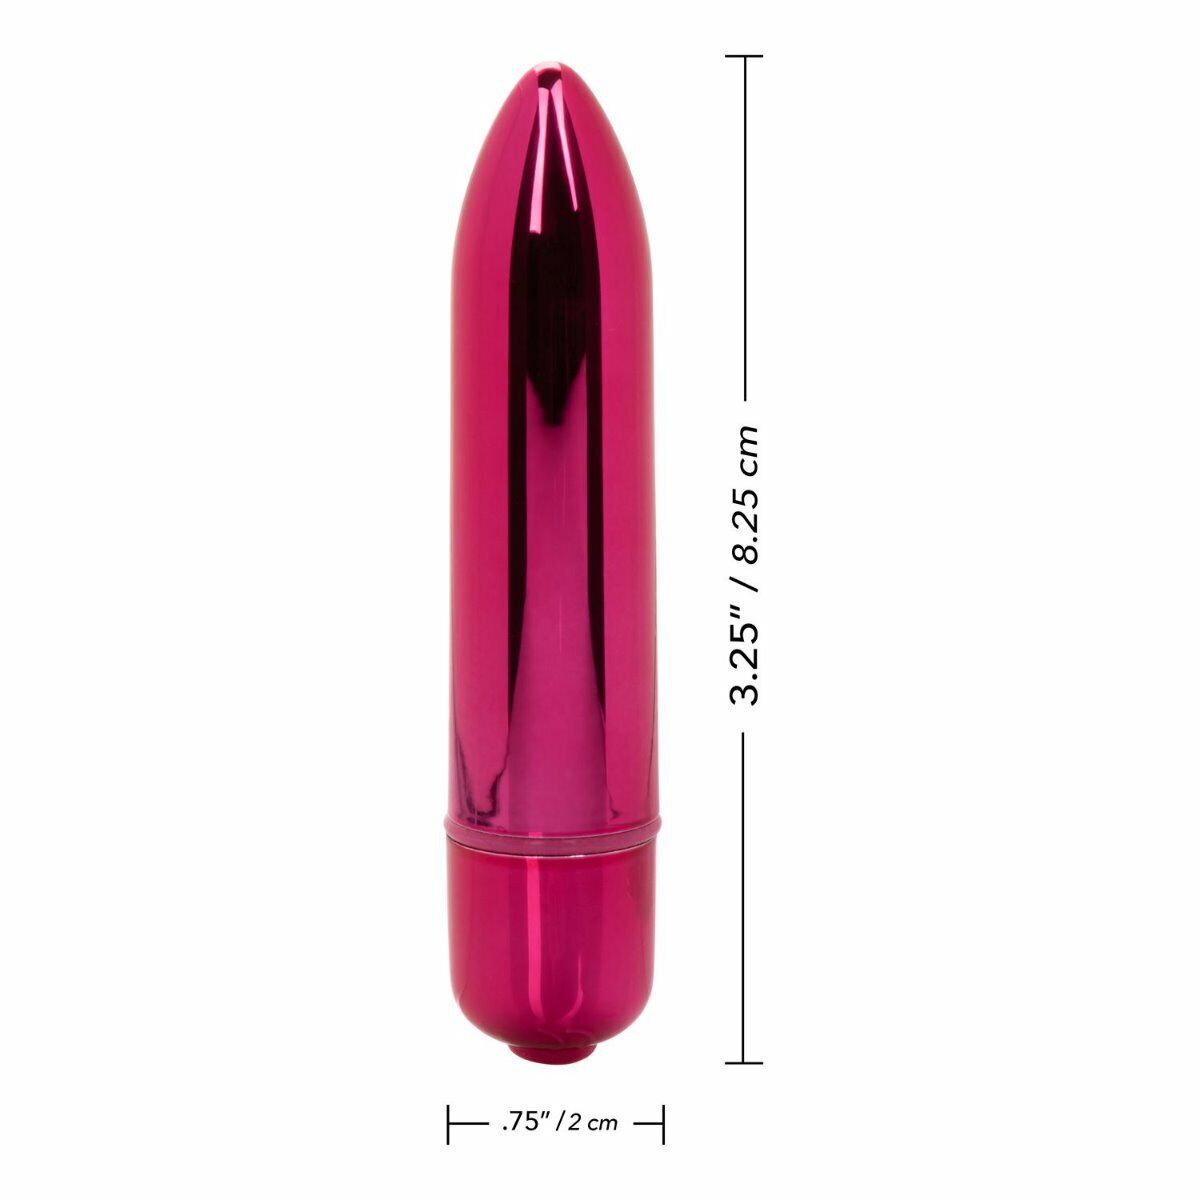 High Intensity Powerful Discreet Wireless Bullet Clitoral Anal Sex Vibe Vibrator